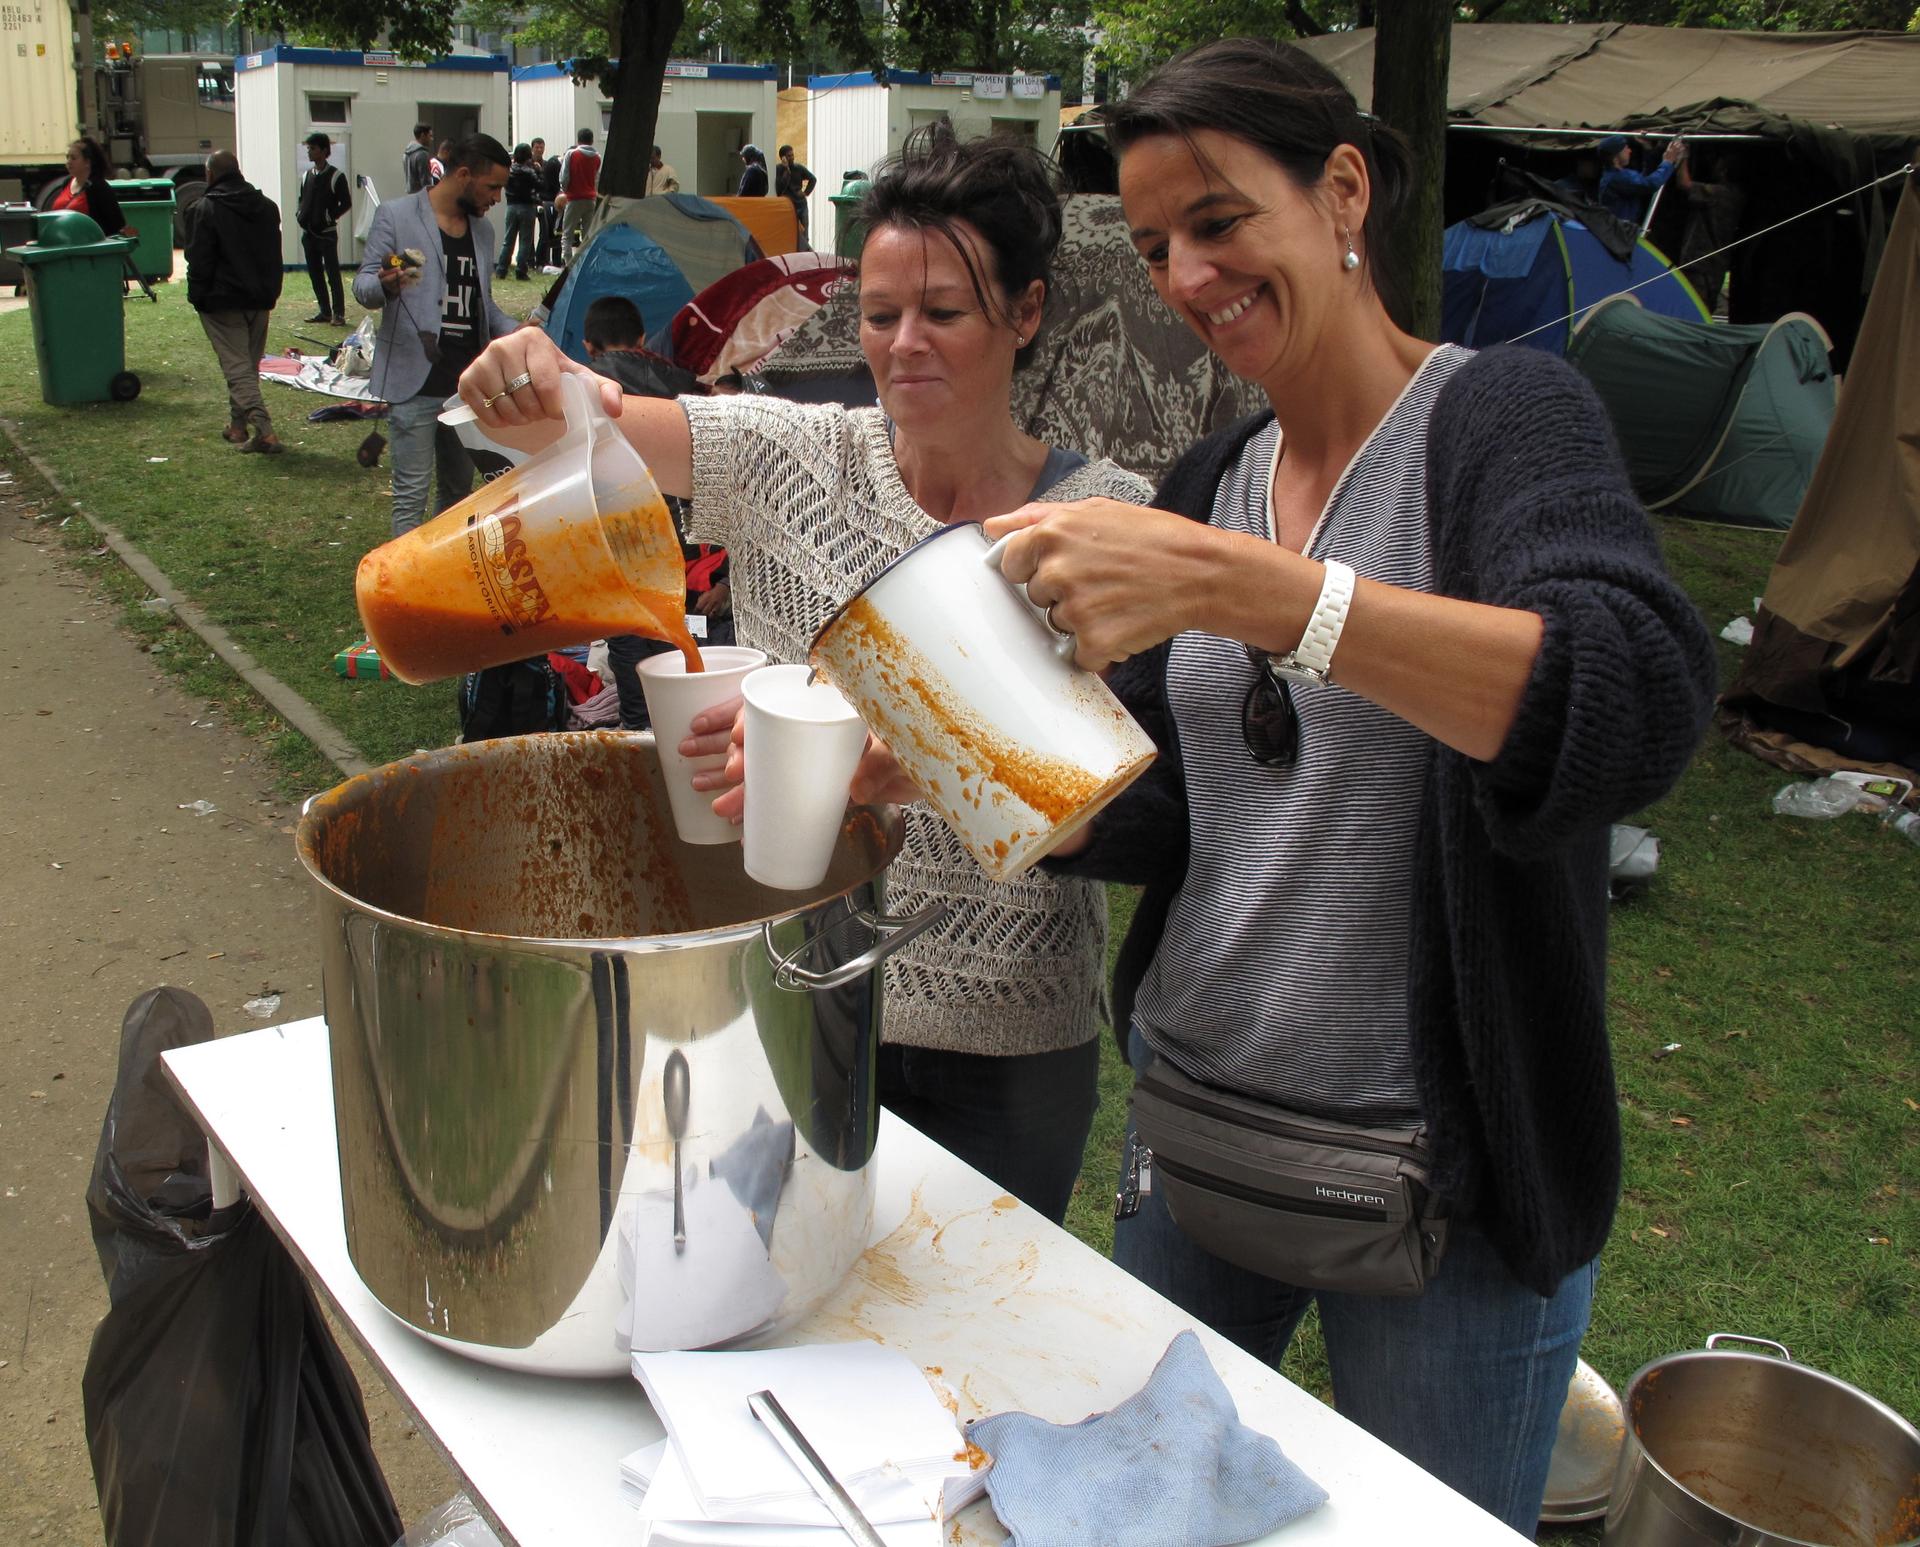 Charlotte and Marijn, two stay-at-home moms from Brussels, say they saw the situation on the news and wanted to pitch in. Their homemade tomato soup (fresh, no canned tomatoes) was to make the refugees feel welcome and demonstrate that Europeans could ban